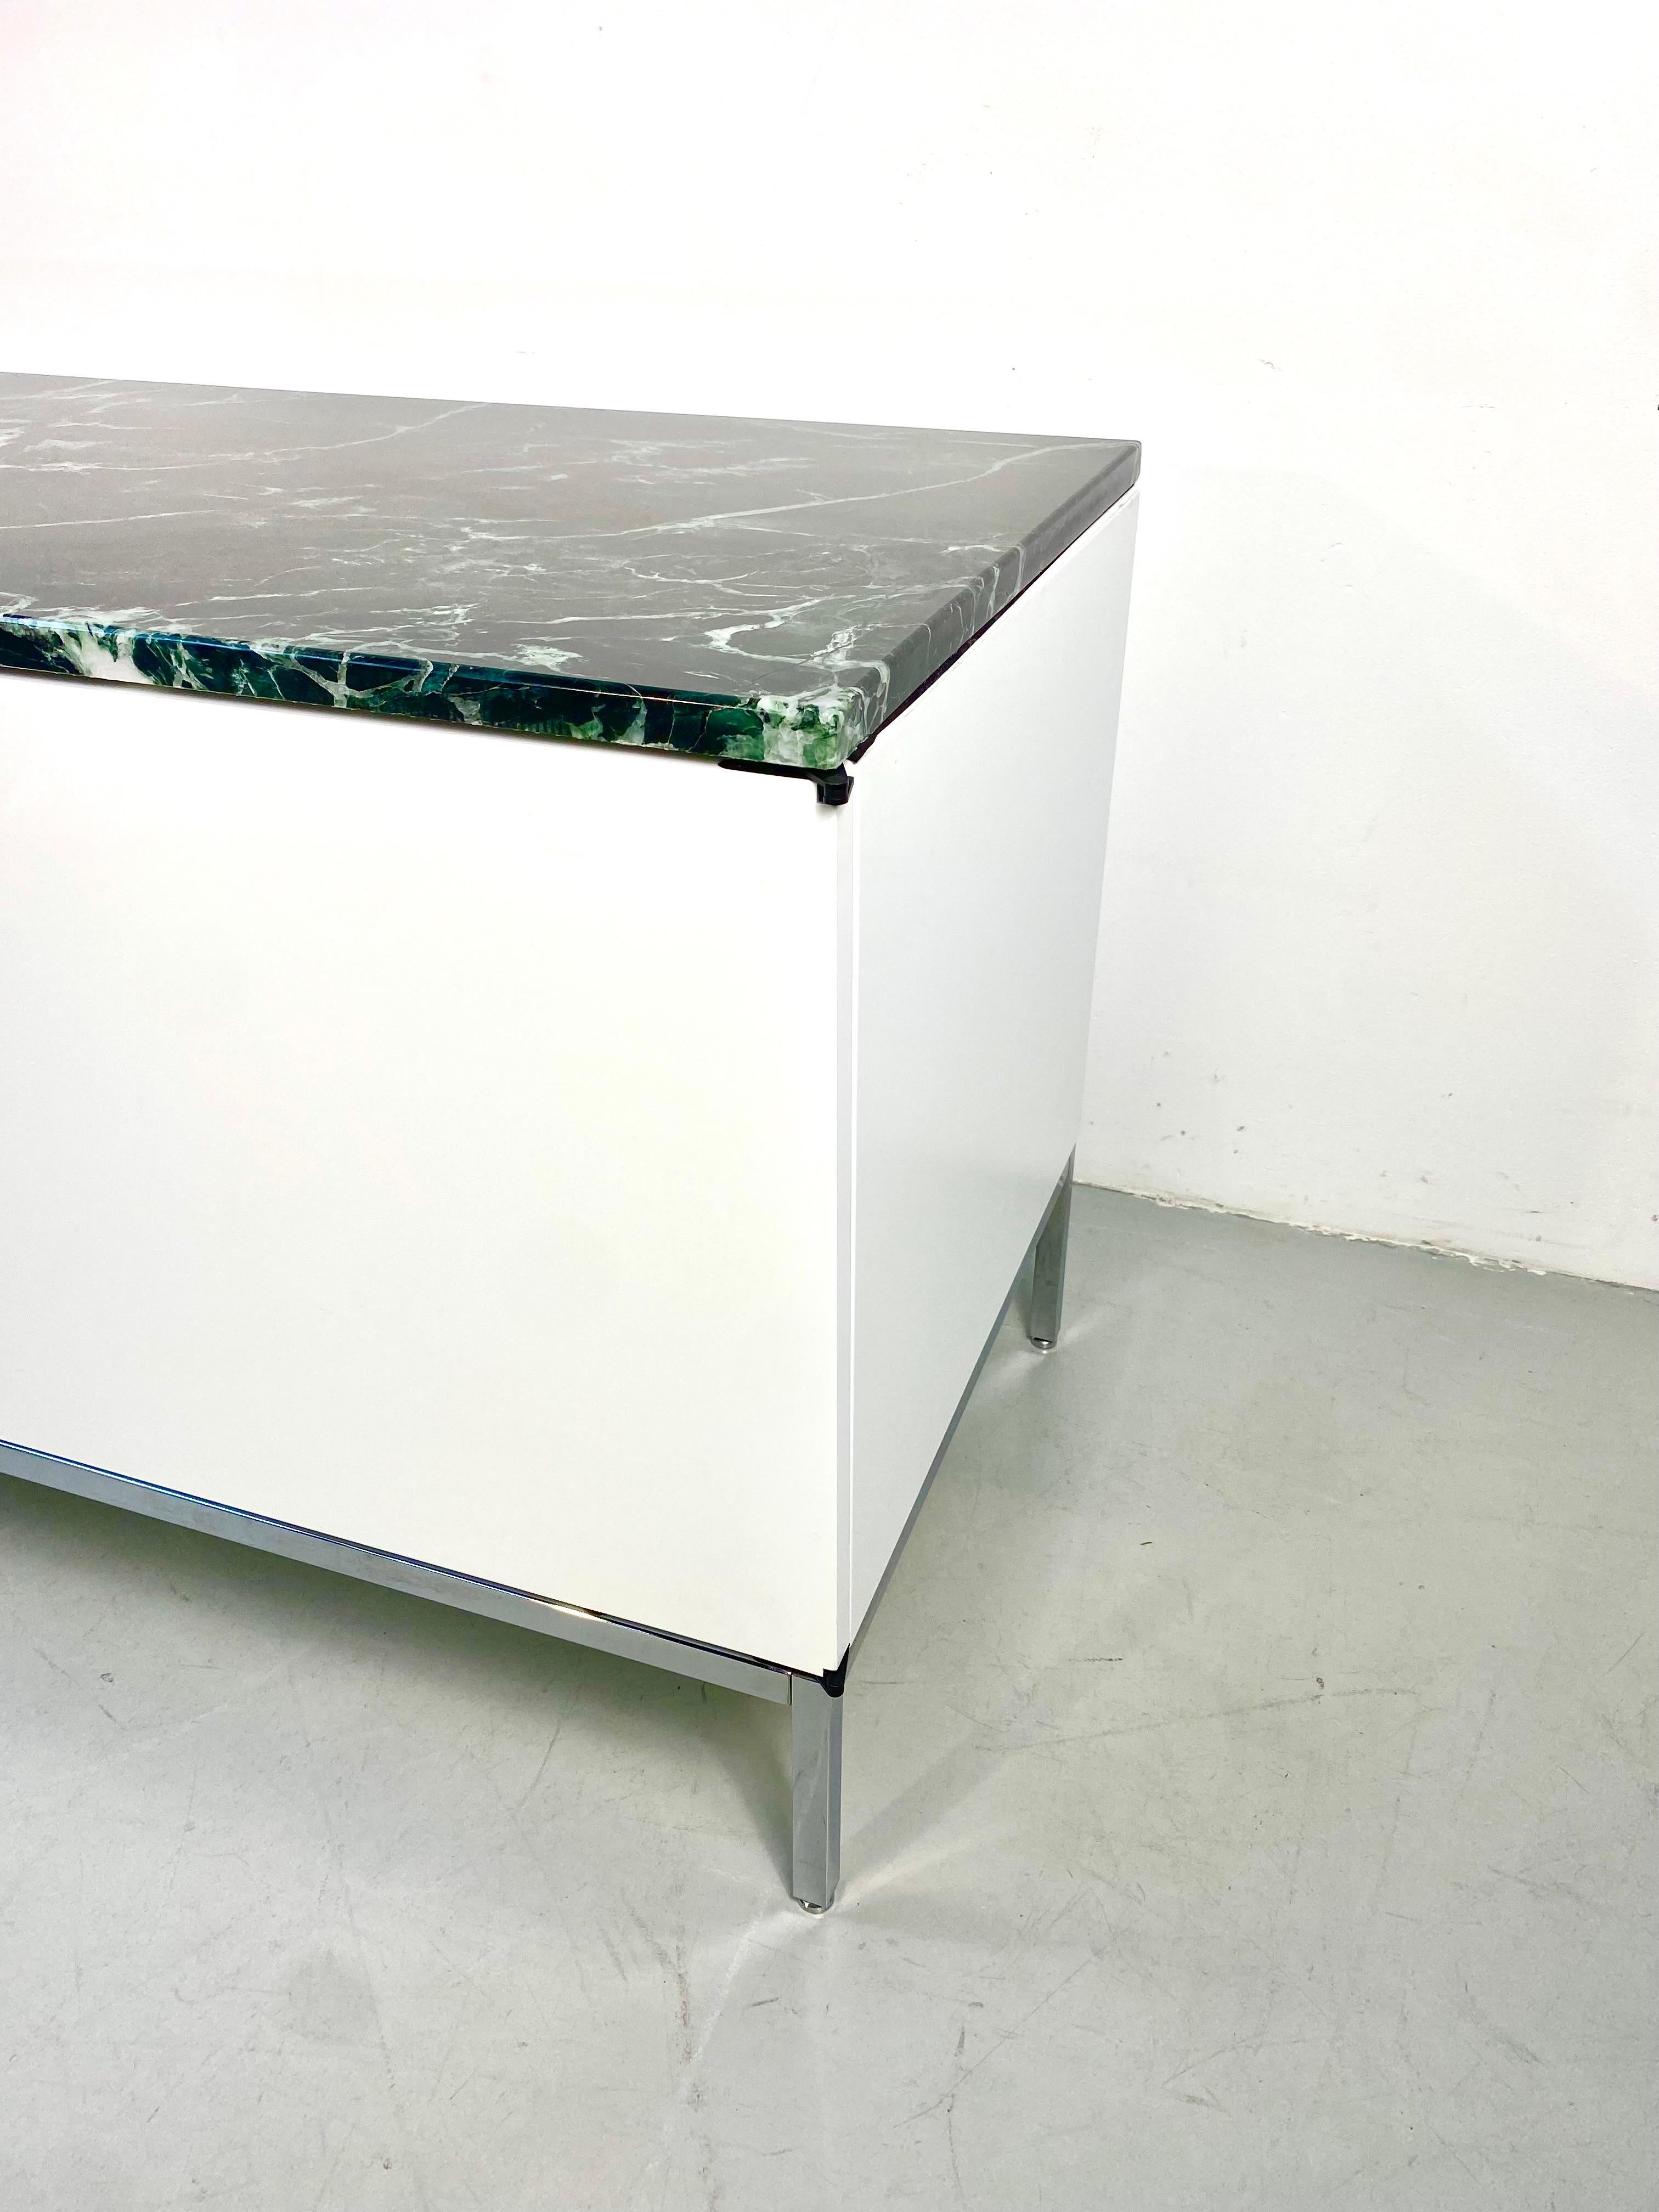 Florence Knoll Credenza New Edition with Alpi Verdi Marble Top, 2010s For Sale 6